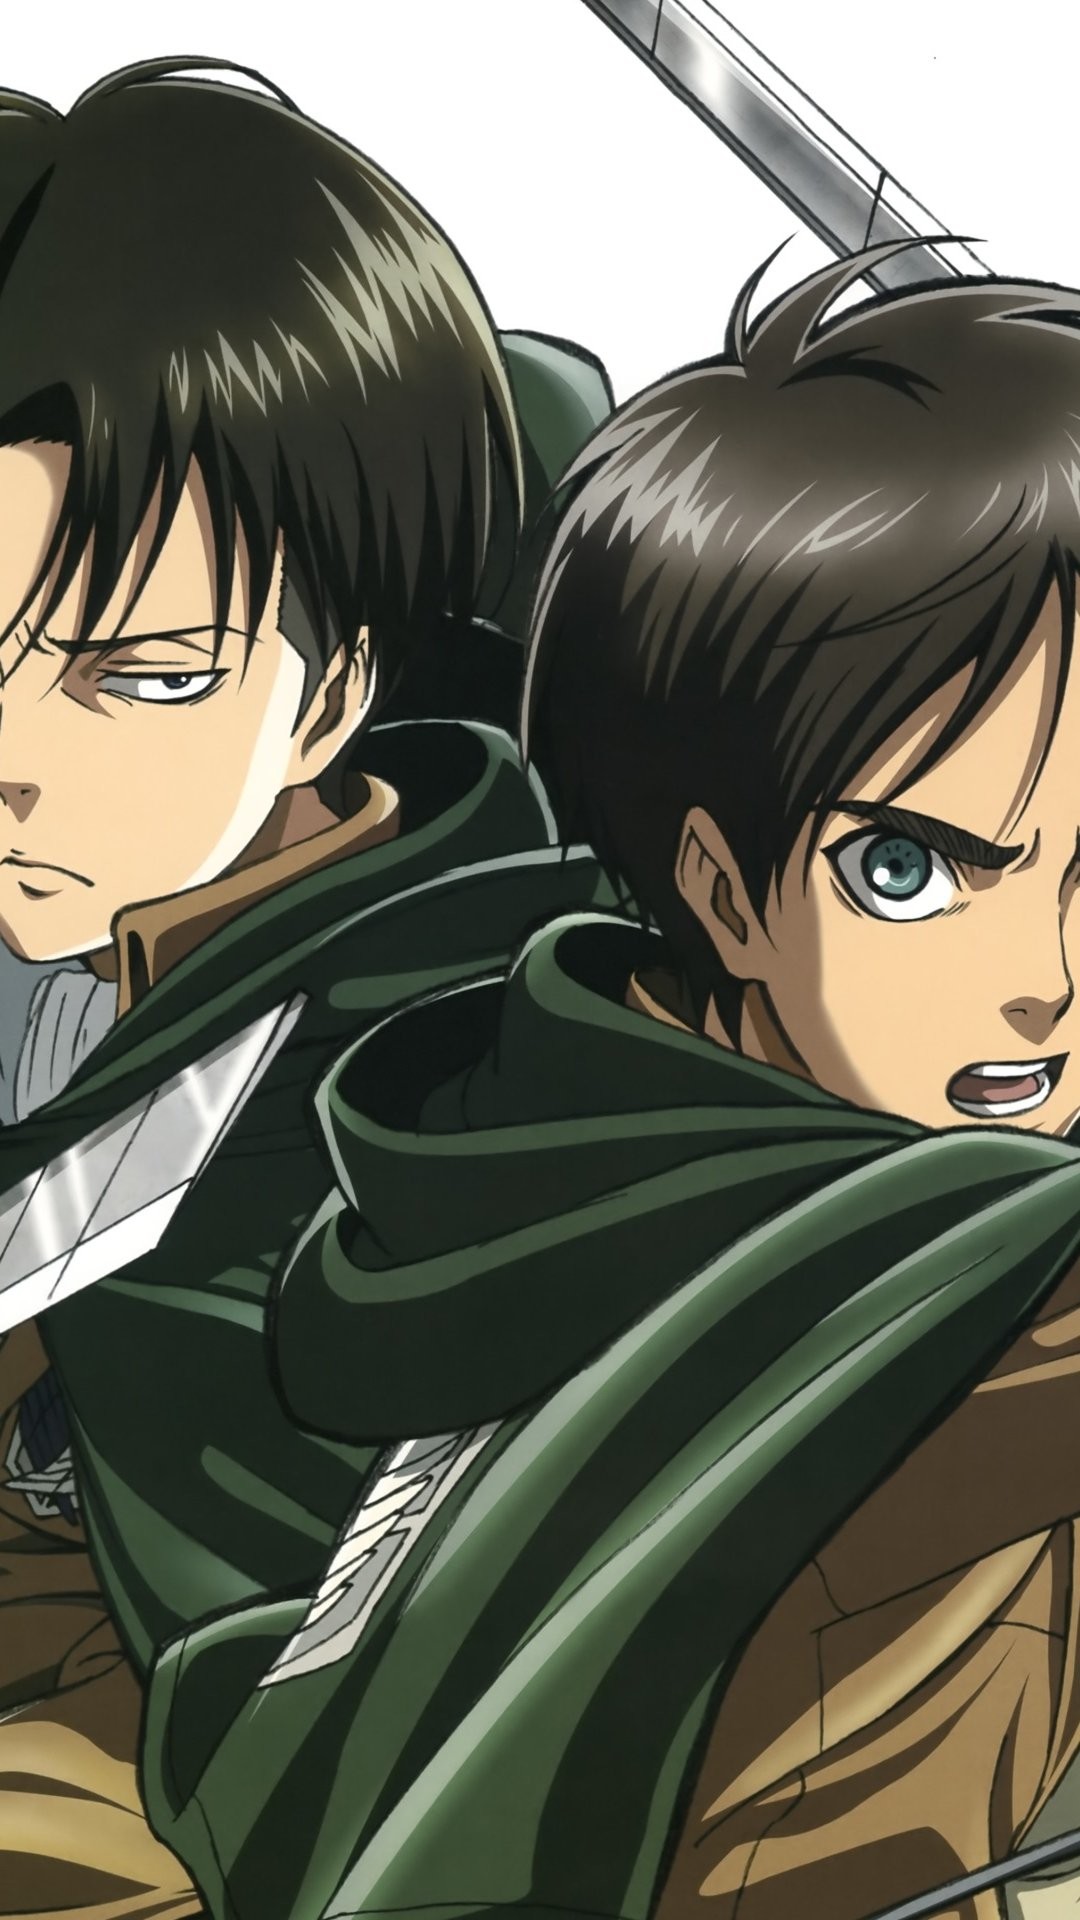 Eren Jaeger and Rivaille